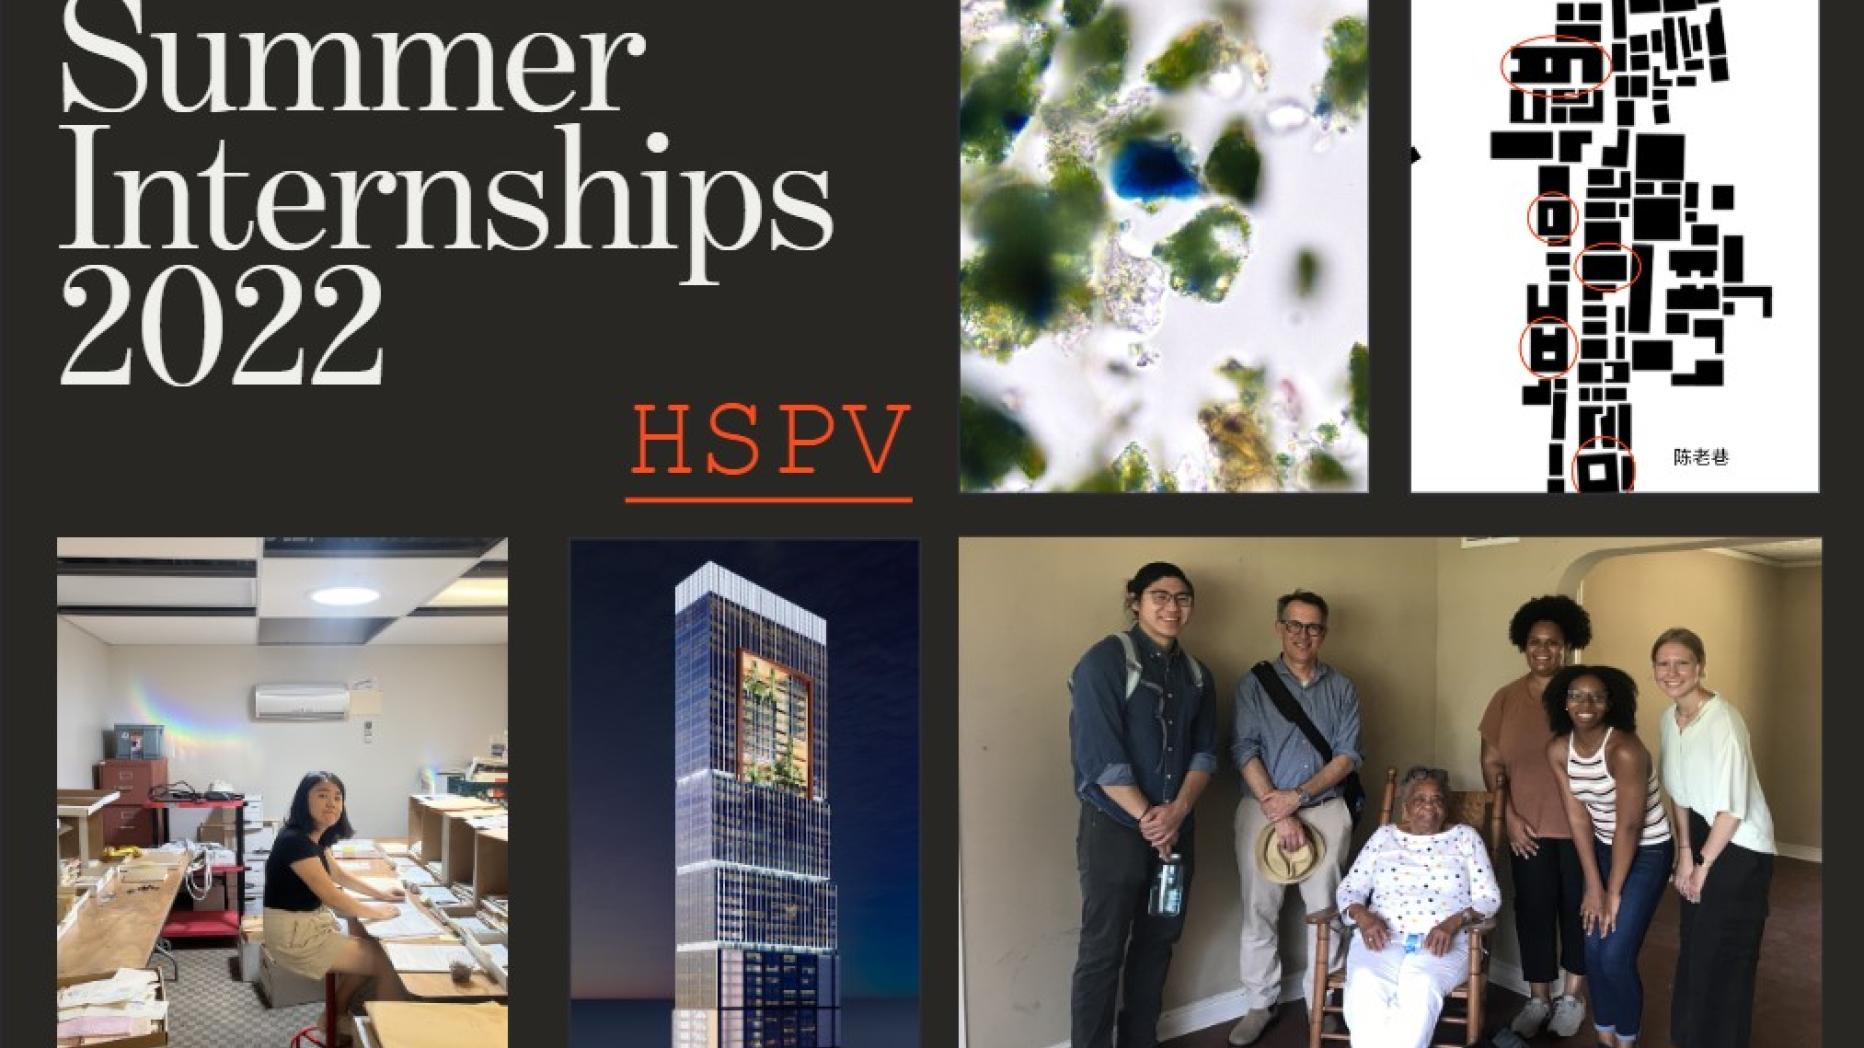 collage of photos from internships with title "Summer Internships 2022 HSPV"